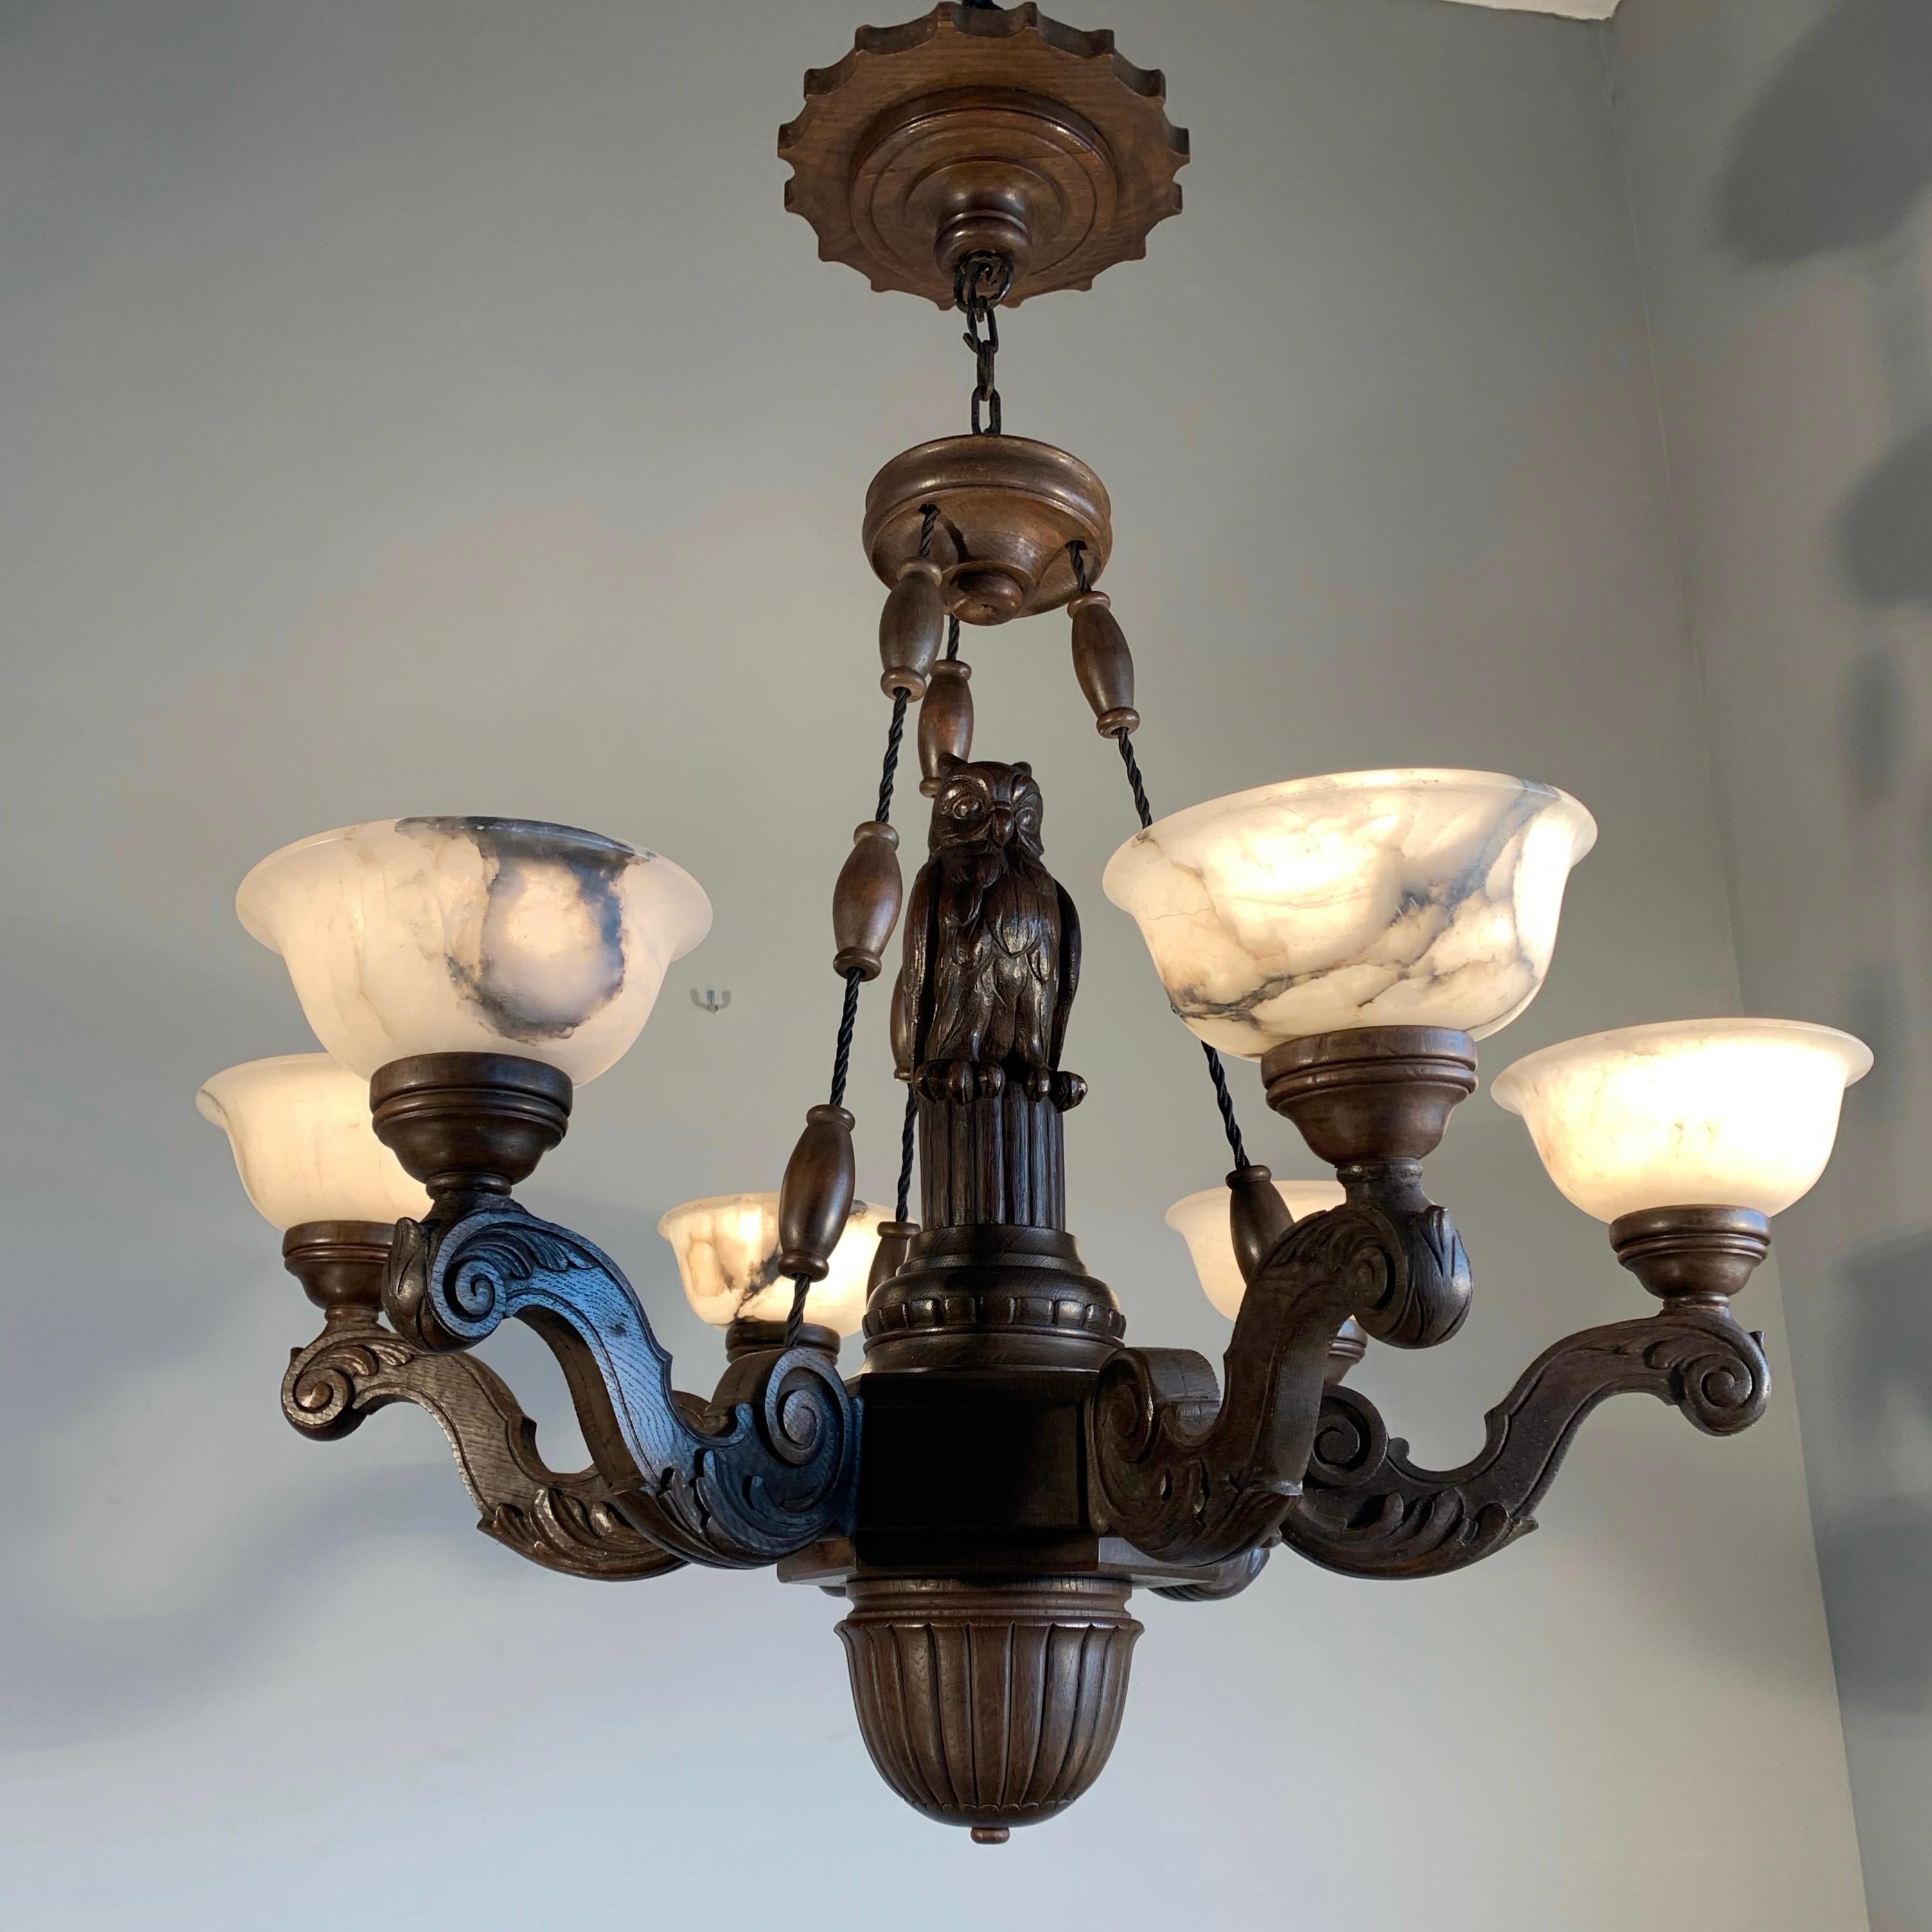 Amazing Arts & Crafts 6-Light Chandelier with Owl Sculpture and Alabaster Shades 5